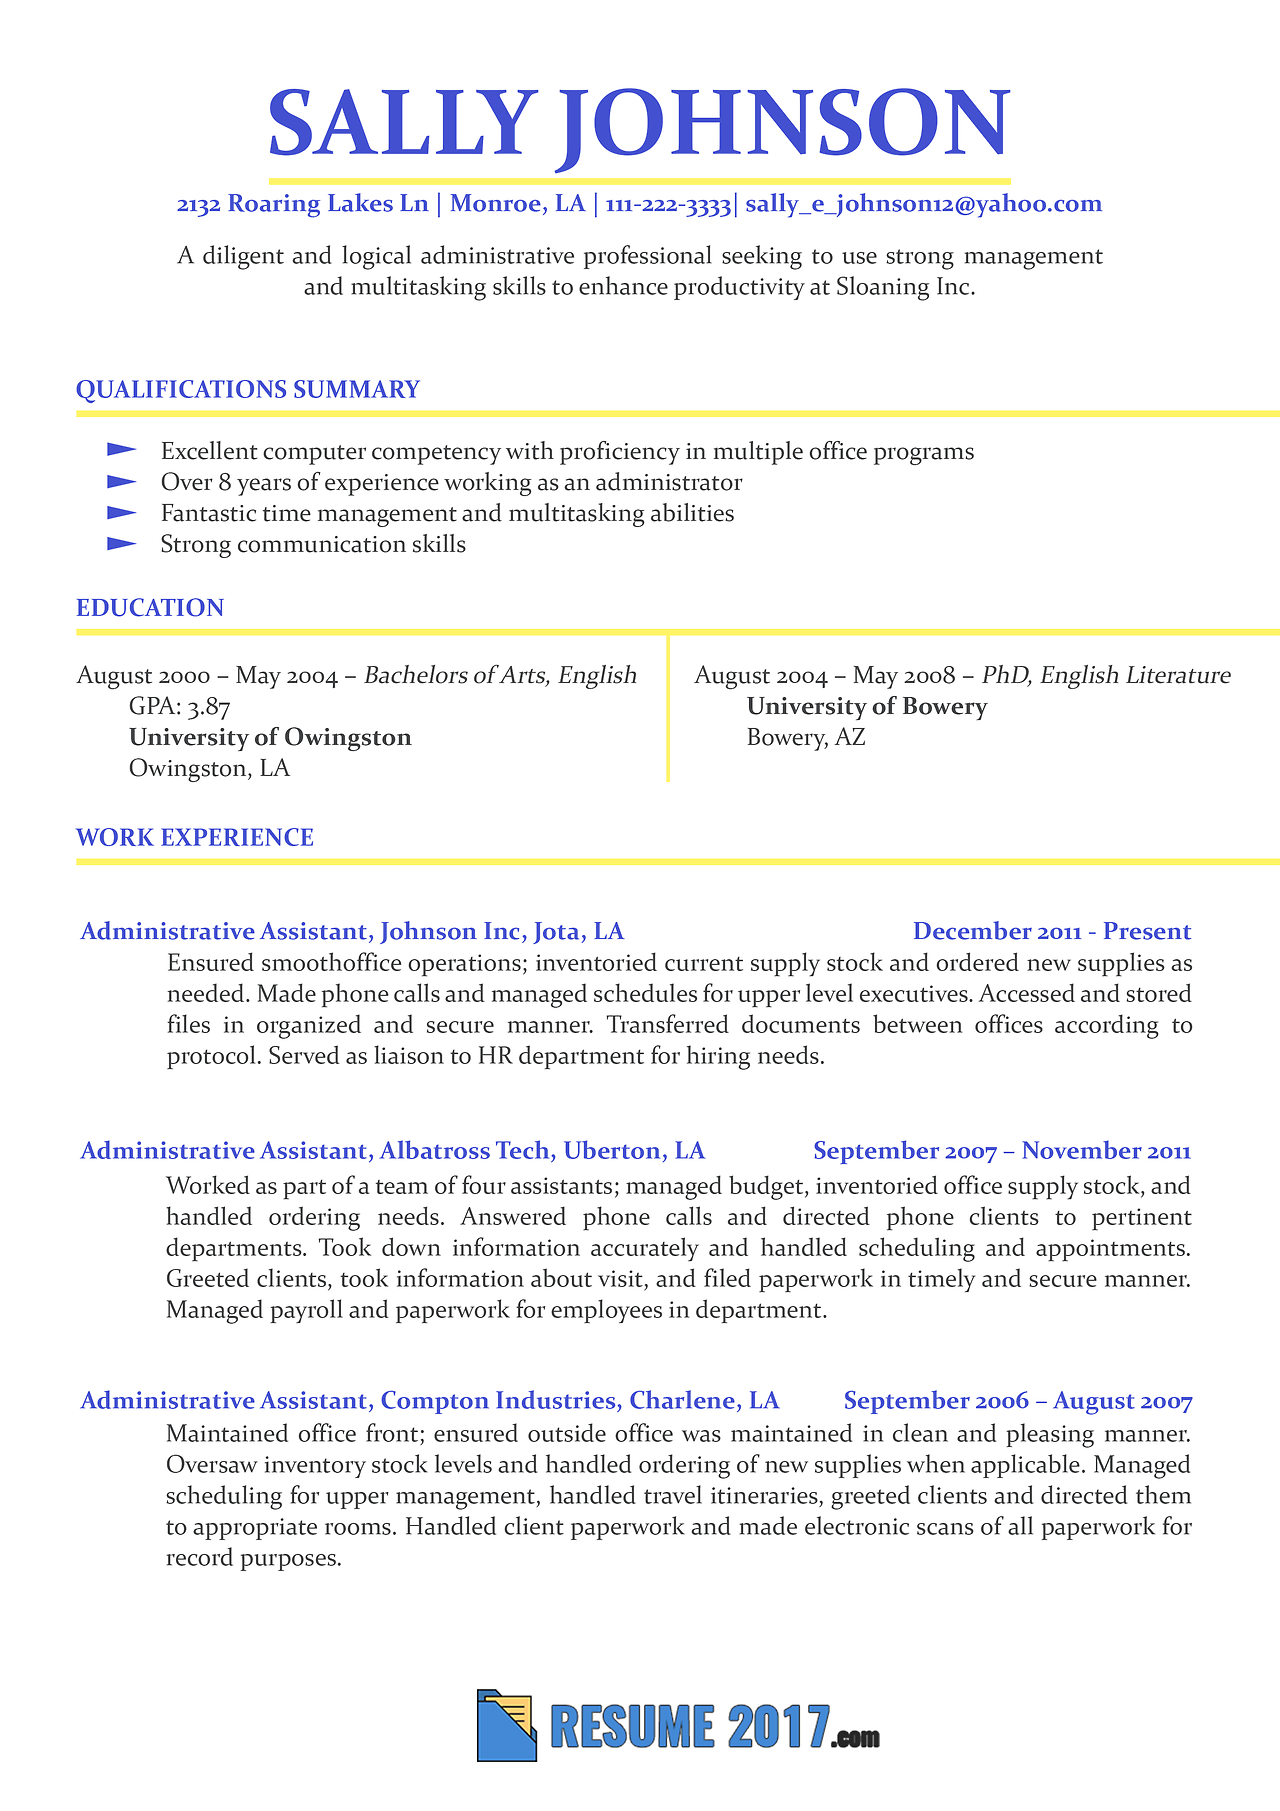 Resume Examples 2018 Usa Resume Format Resume Examples inside proportions 1280 X 1811